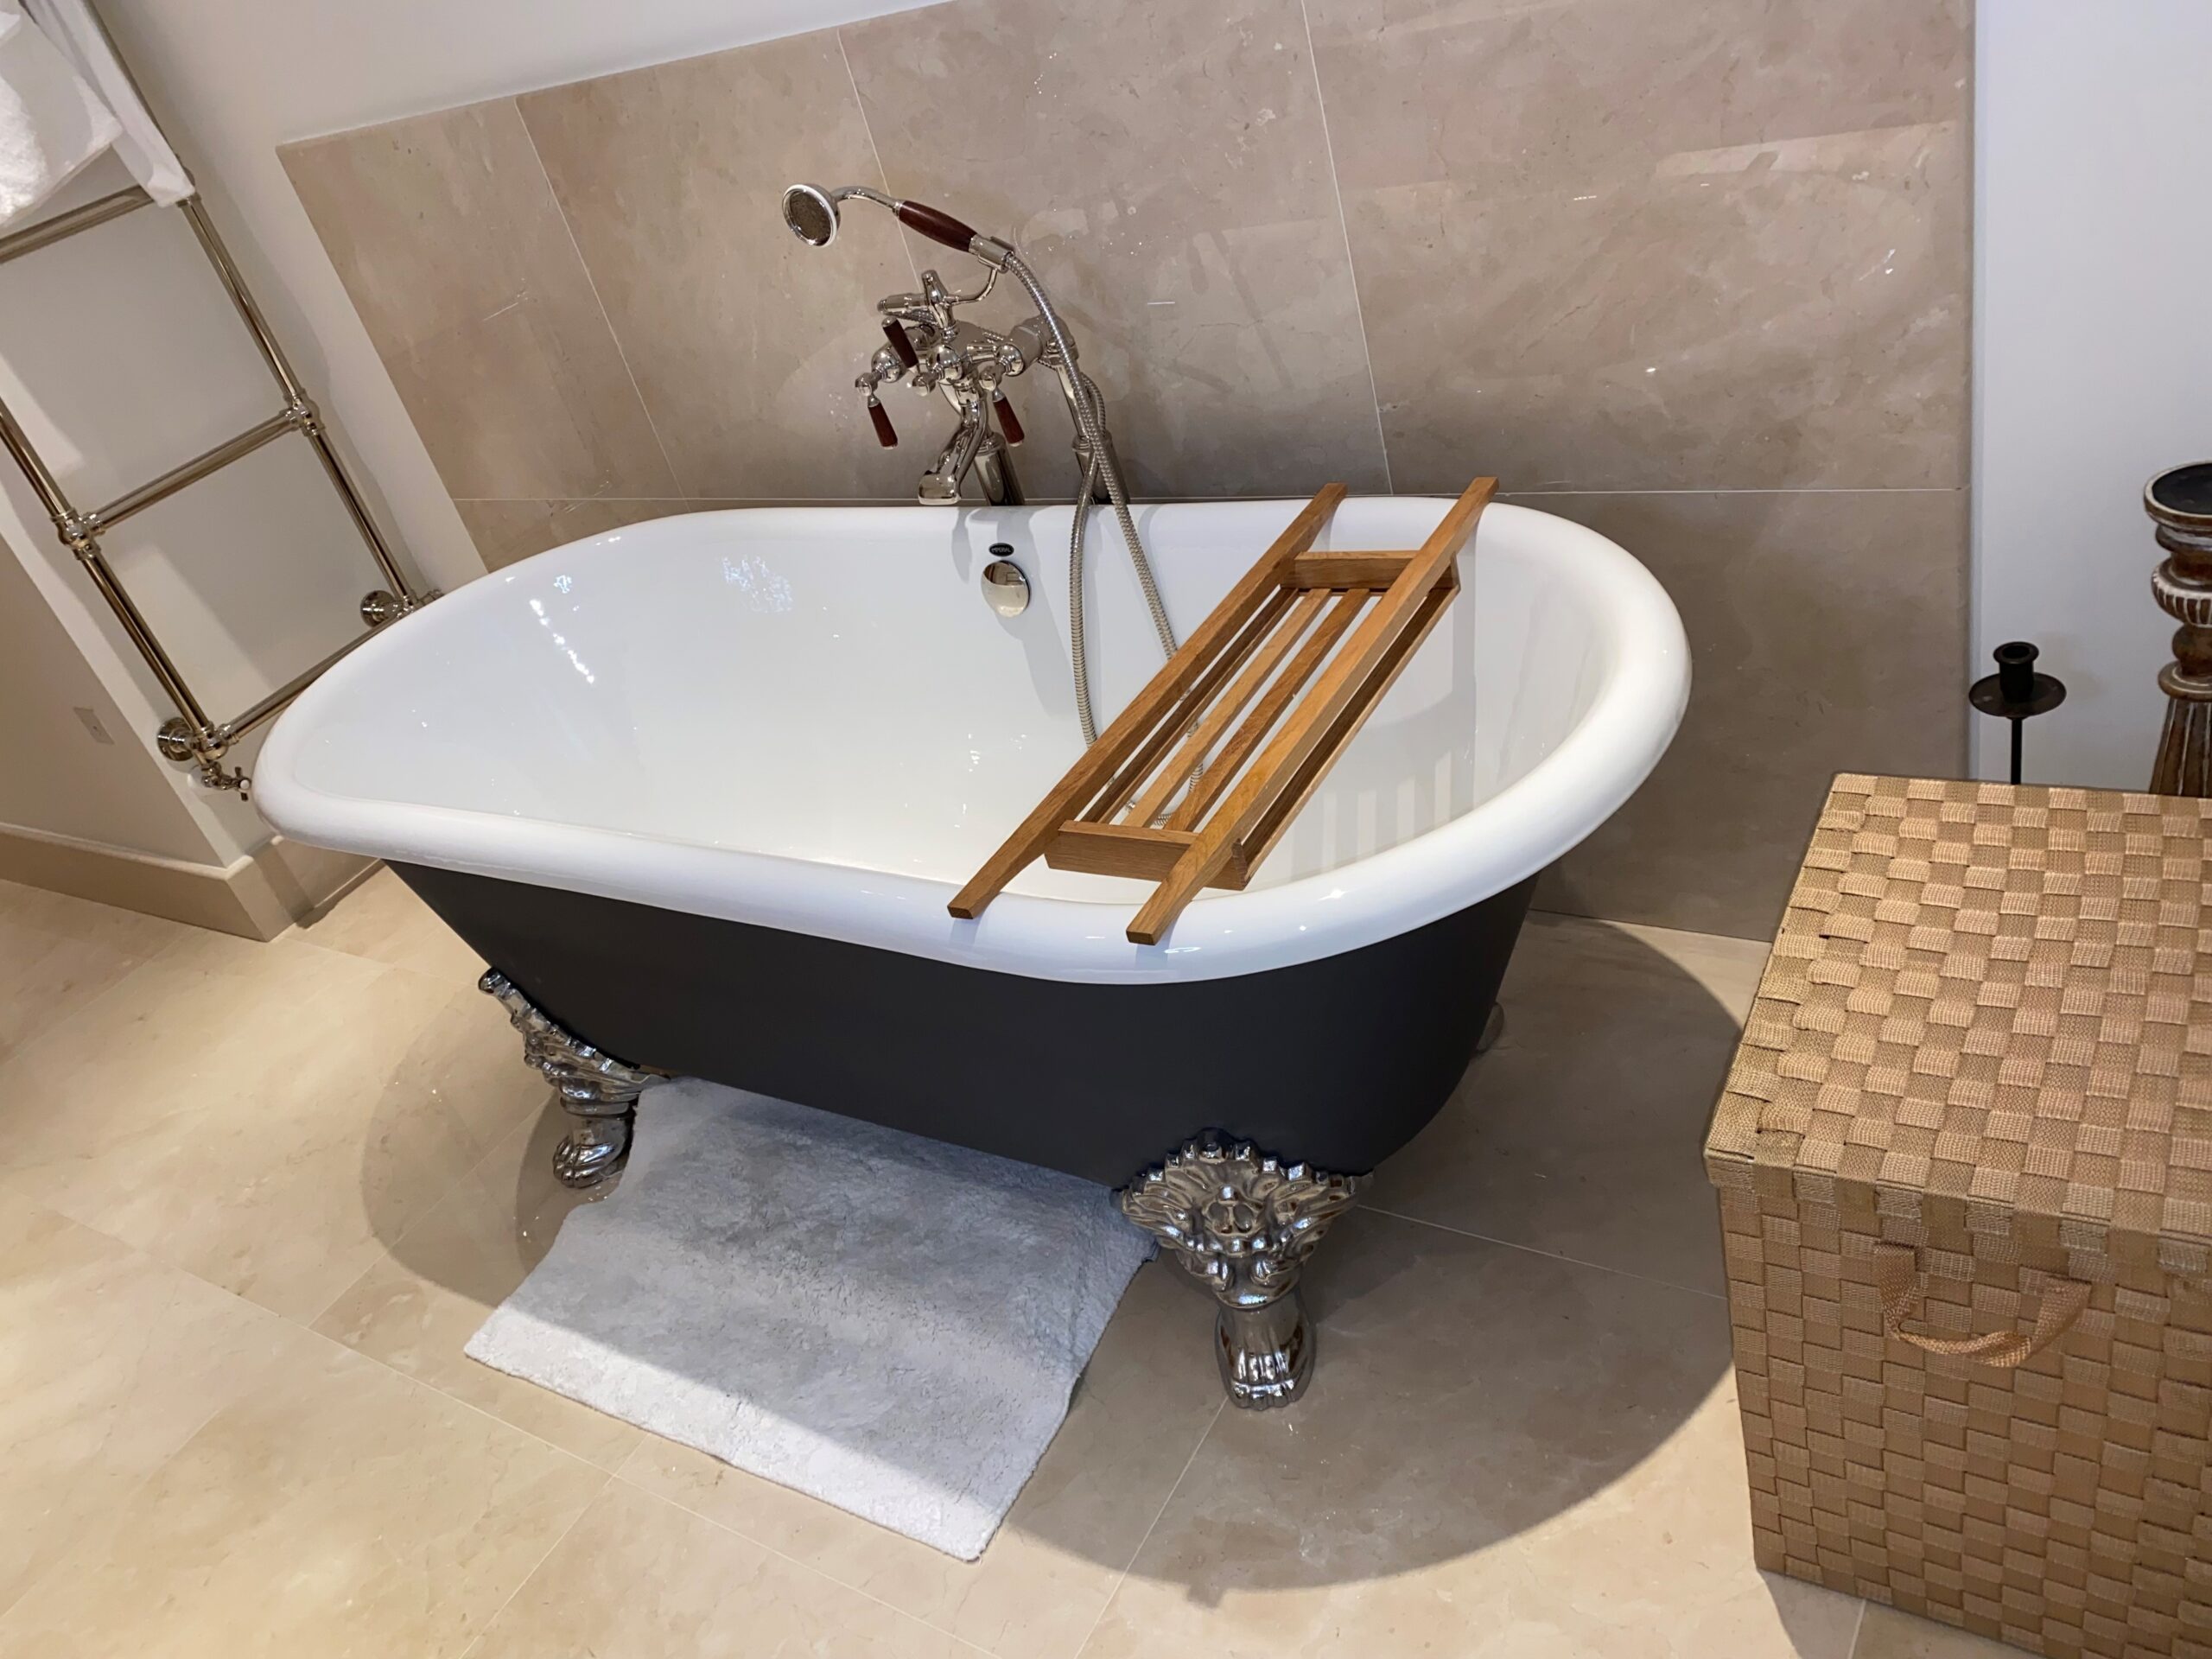 A White Tub With Black Layer and Metallic Legs